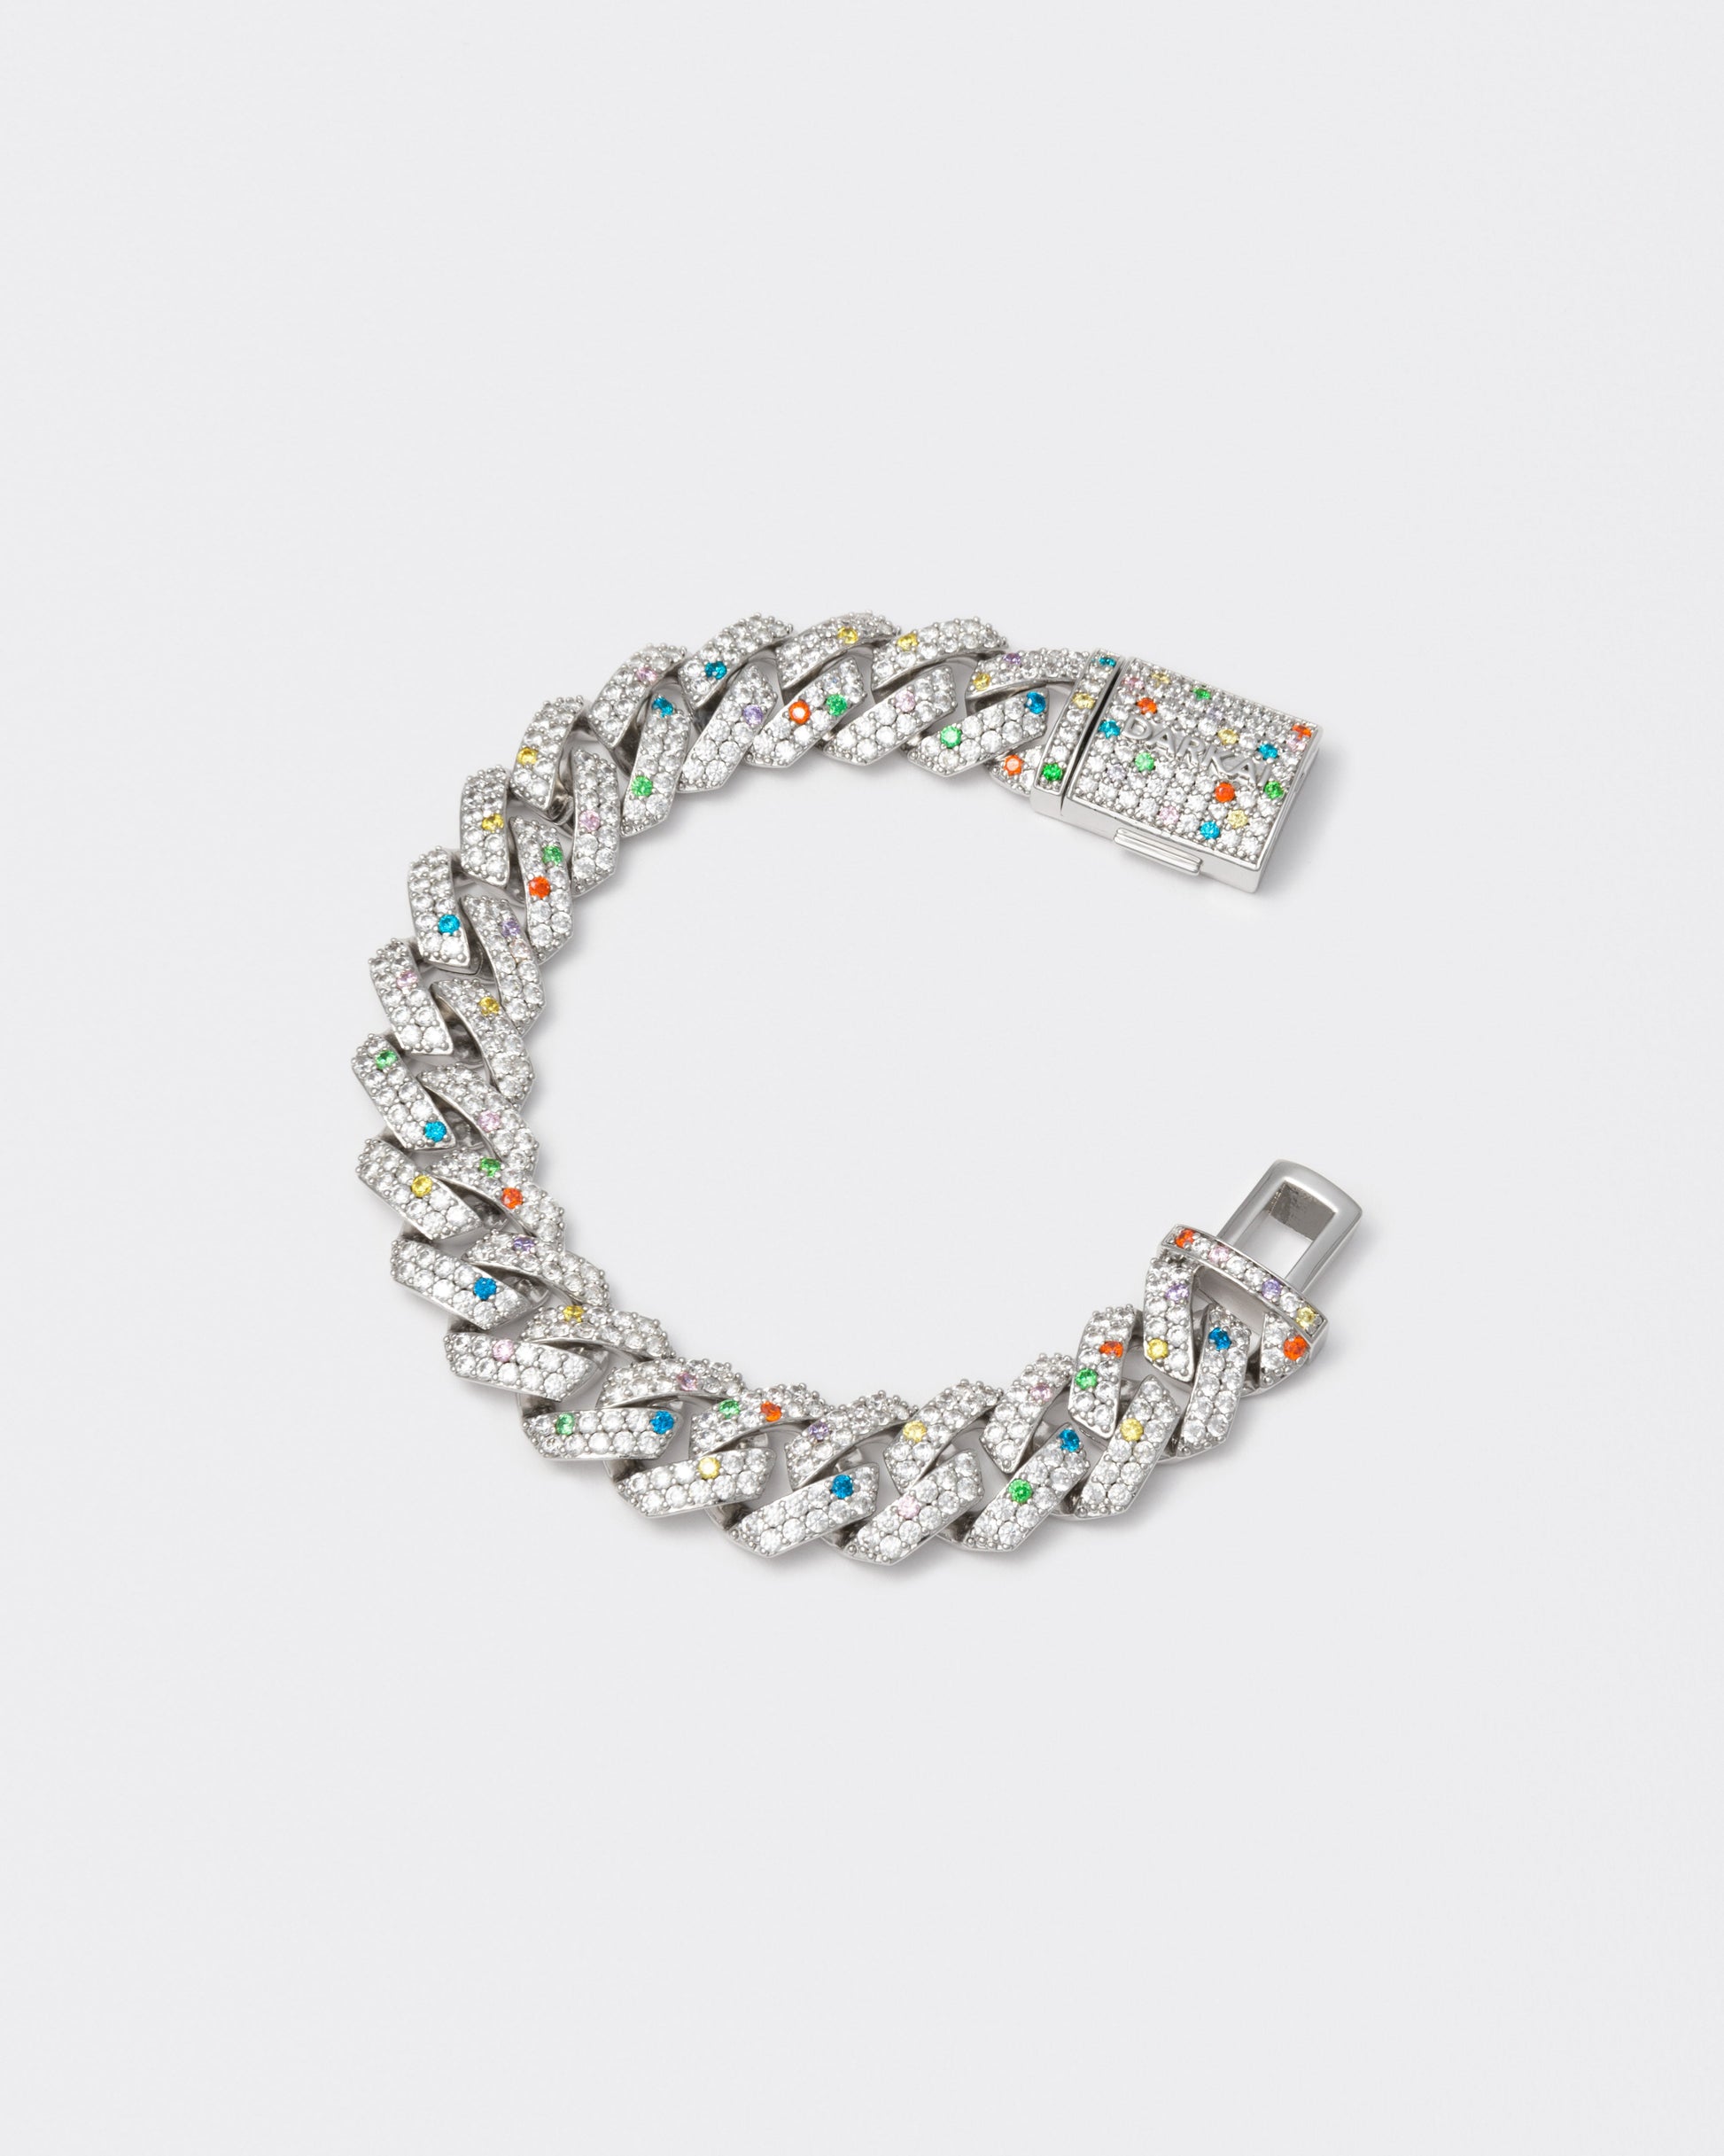 18k white gold coated prong chain bracelet with hand-set micropavé stones in white, violet, orange red, green, golden yellow and topaz blue